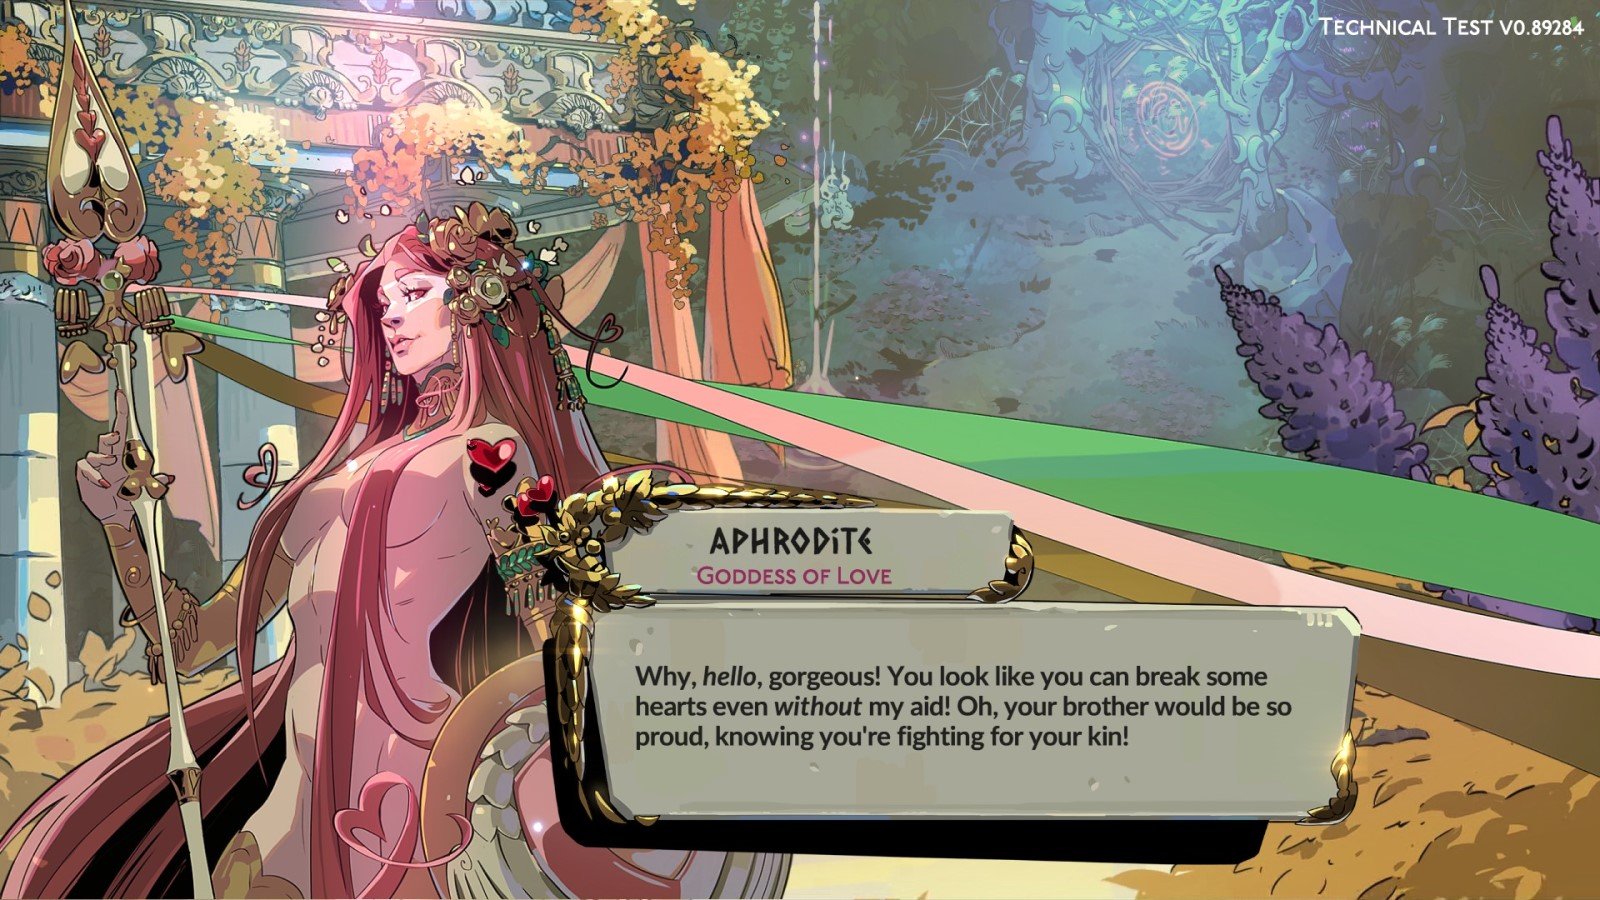 A screenshot from the Hades II Technical Test showing goddess of love Aphrodite wielding a spear and wearing warpaint